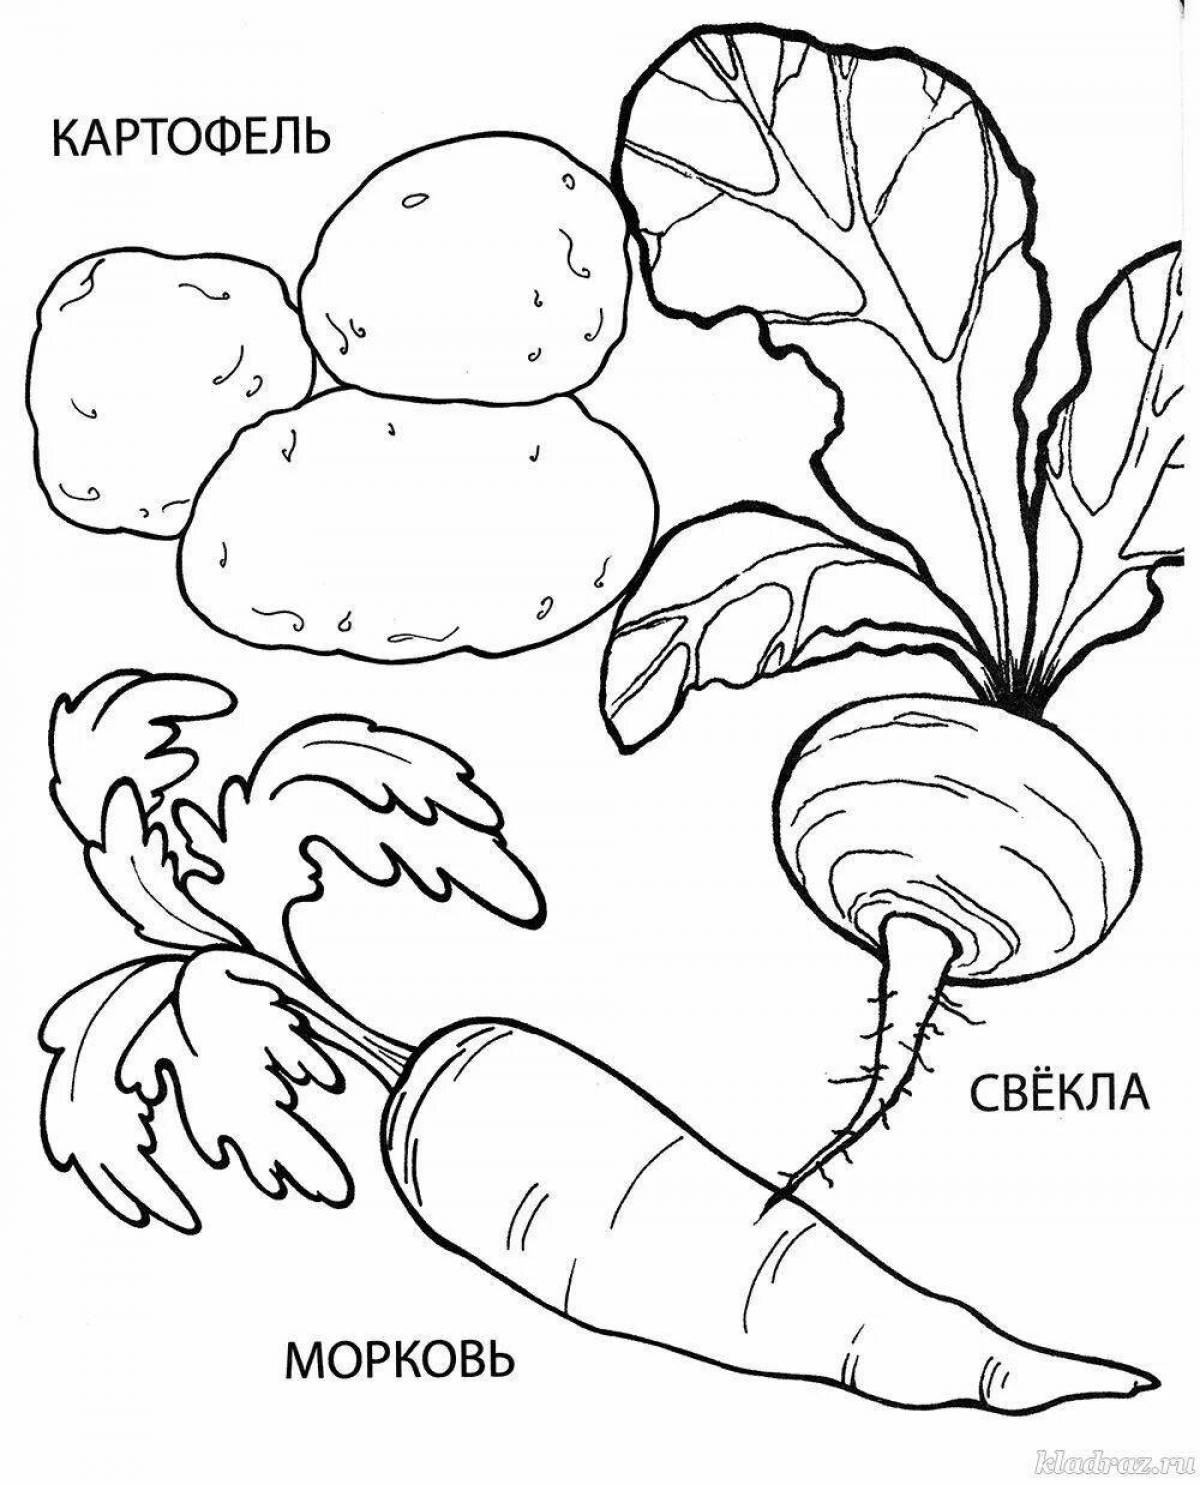 Comfortable vegetable coloring book for kids